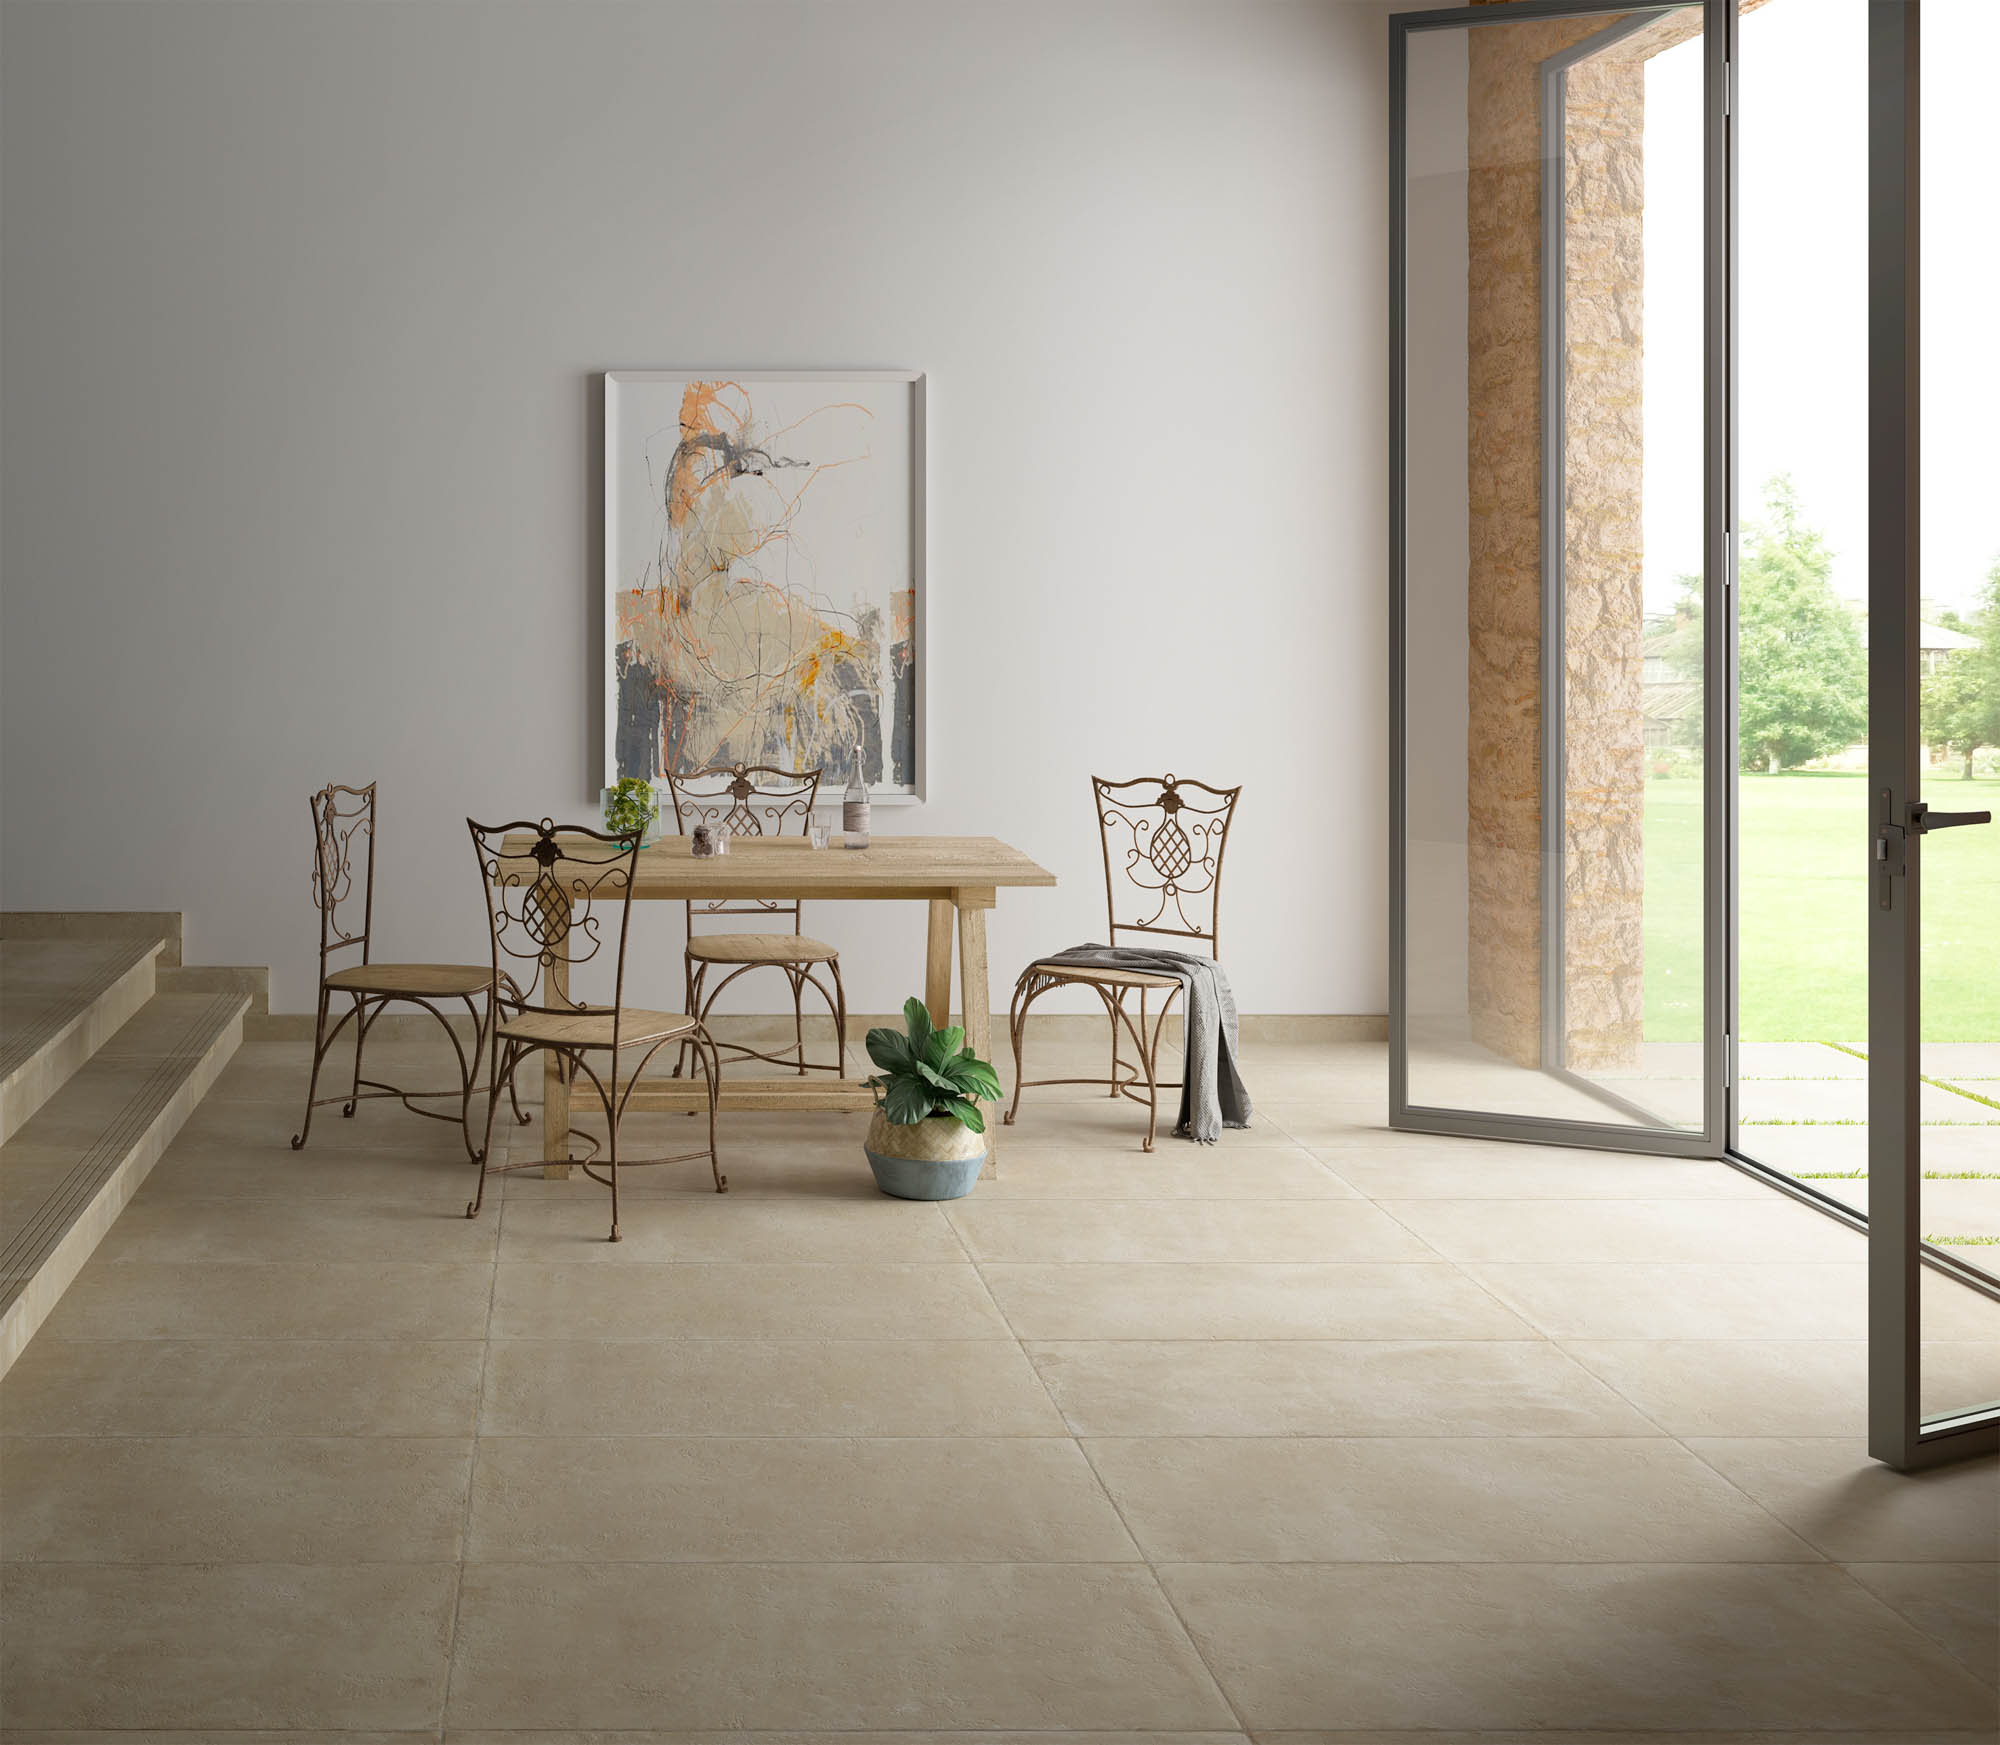 interior and exterior floor in the same style with rustic tiles